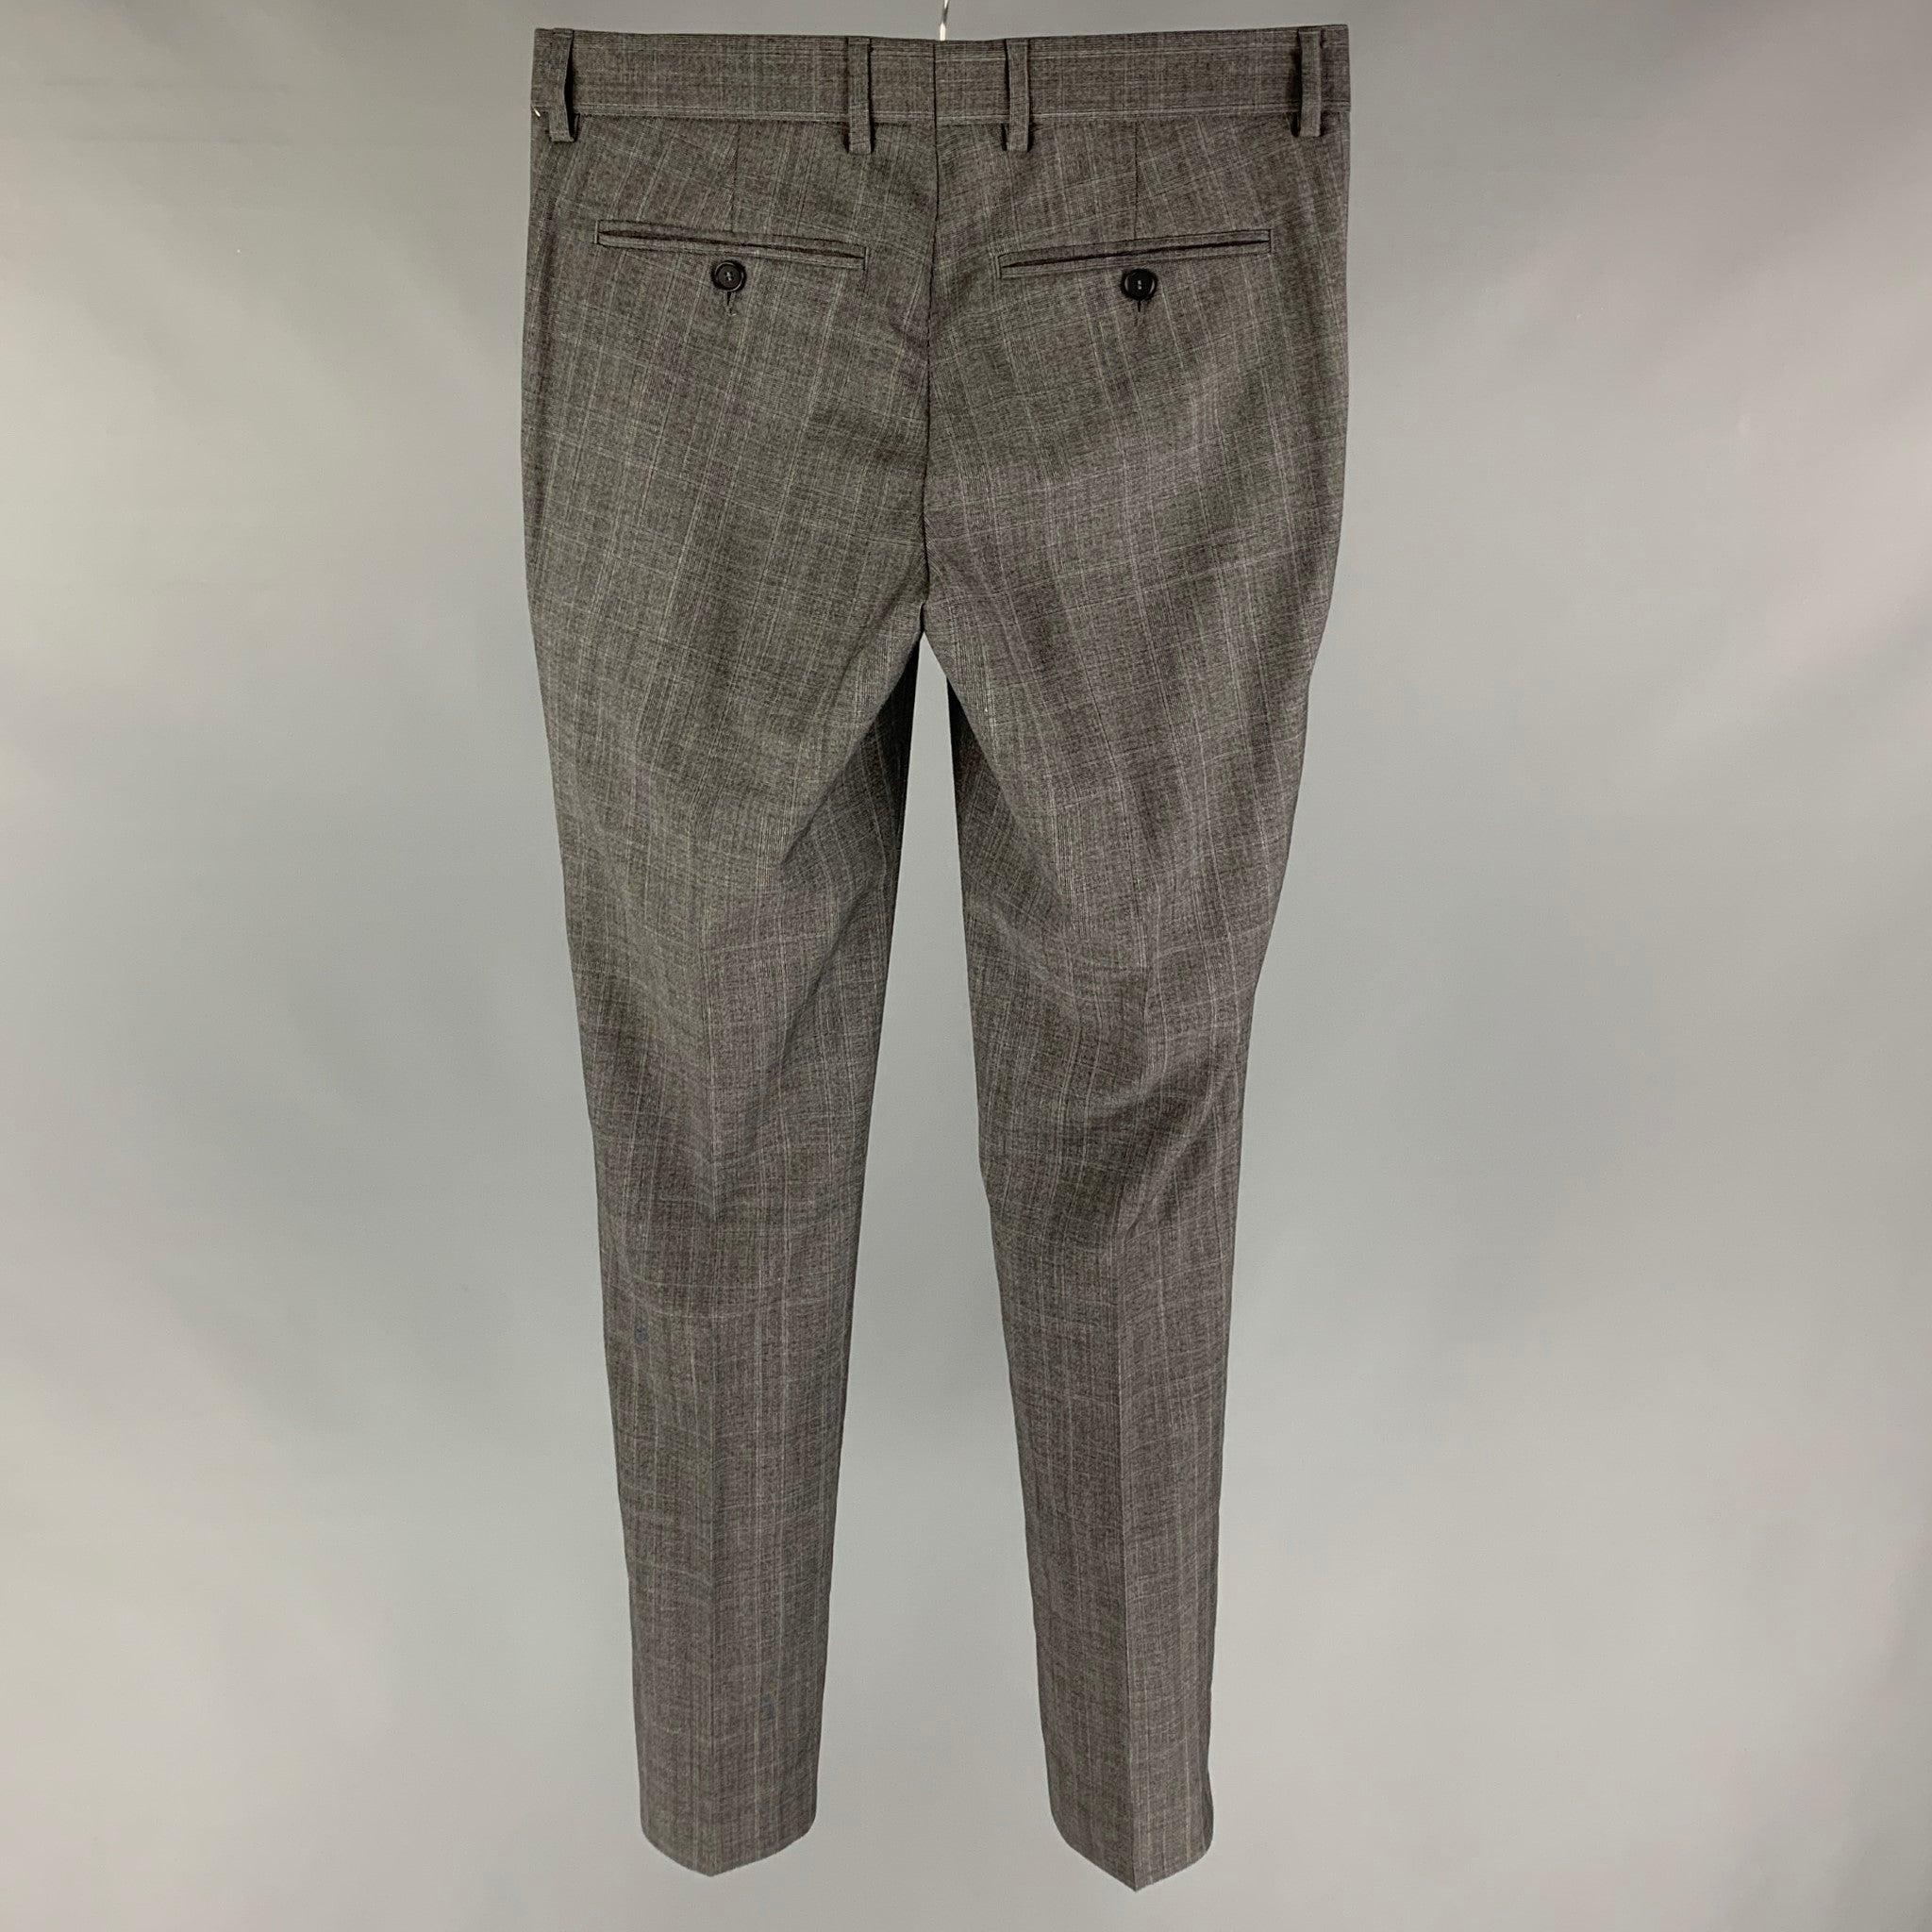 THE KOOPLES dress pants comes in a grey plaid wool 
featuring a slim fit, front tab, and a zip fly closure.
Excellent
Pre-Owned Condition. 

Marked:   44 

Measurements: 
  Waist: 30 inches Rise: 9 inches Inseam: 32 inches Leg Opening: 12 inches 
 